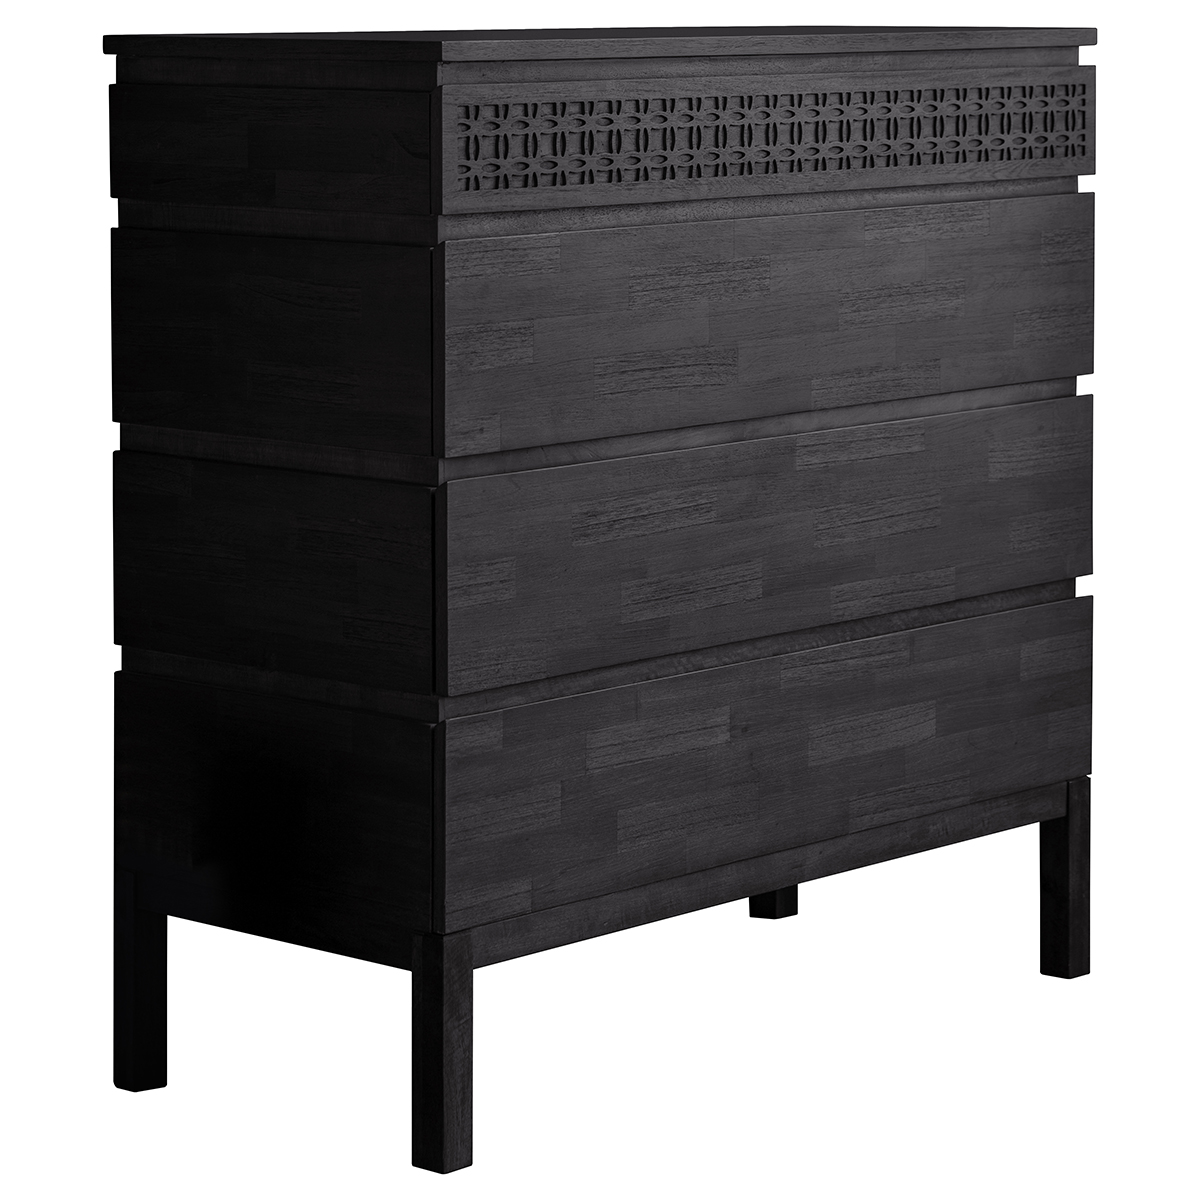 Gallery Direct Boho Boutique 4 Drawer Chest